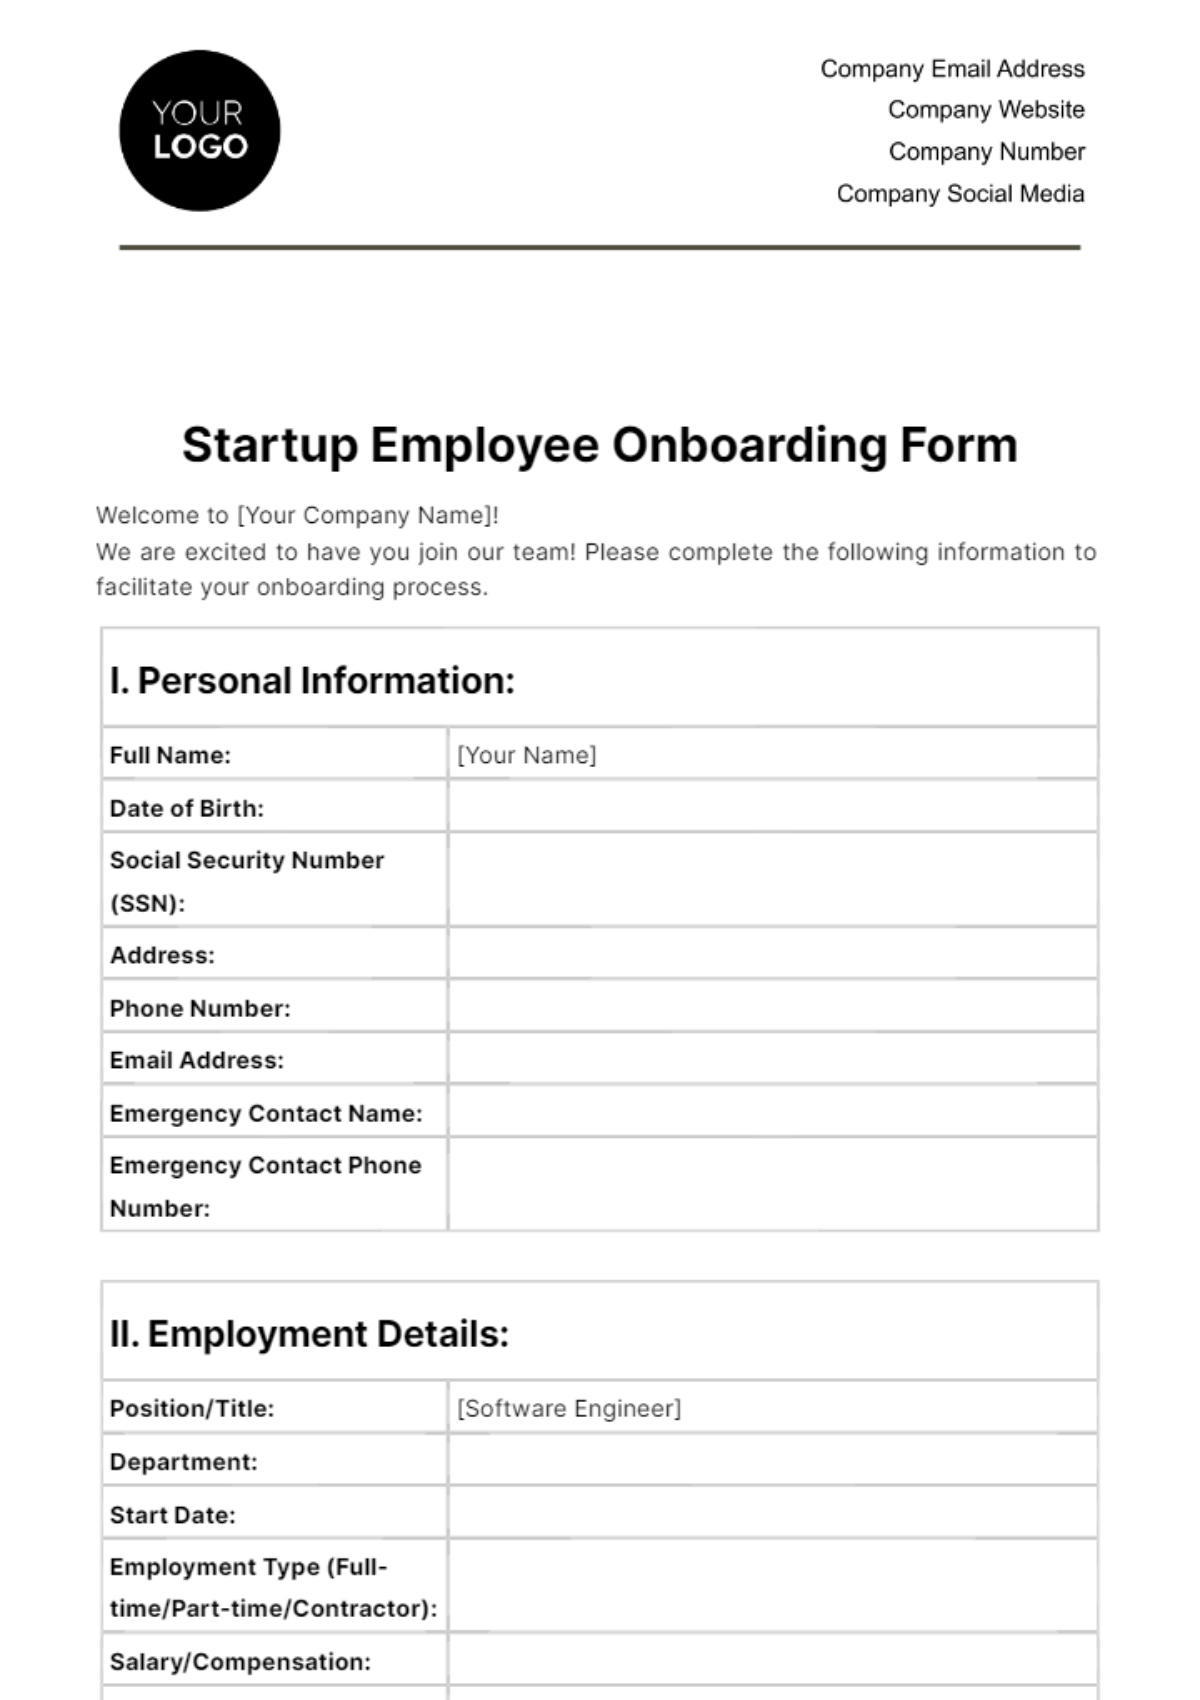 Startup Employee Onboarding Form Template